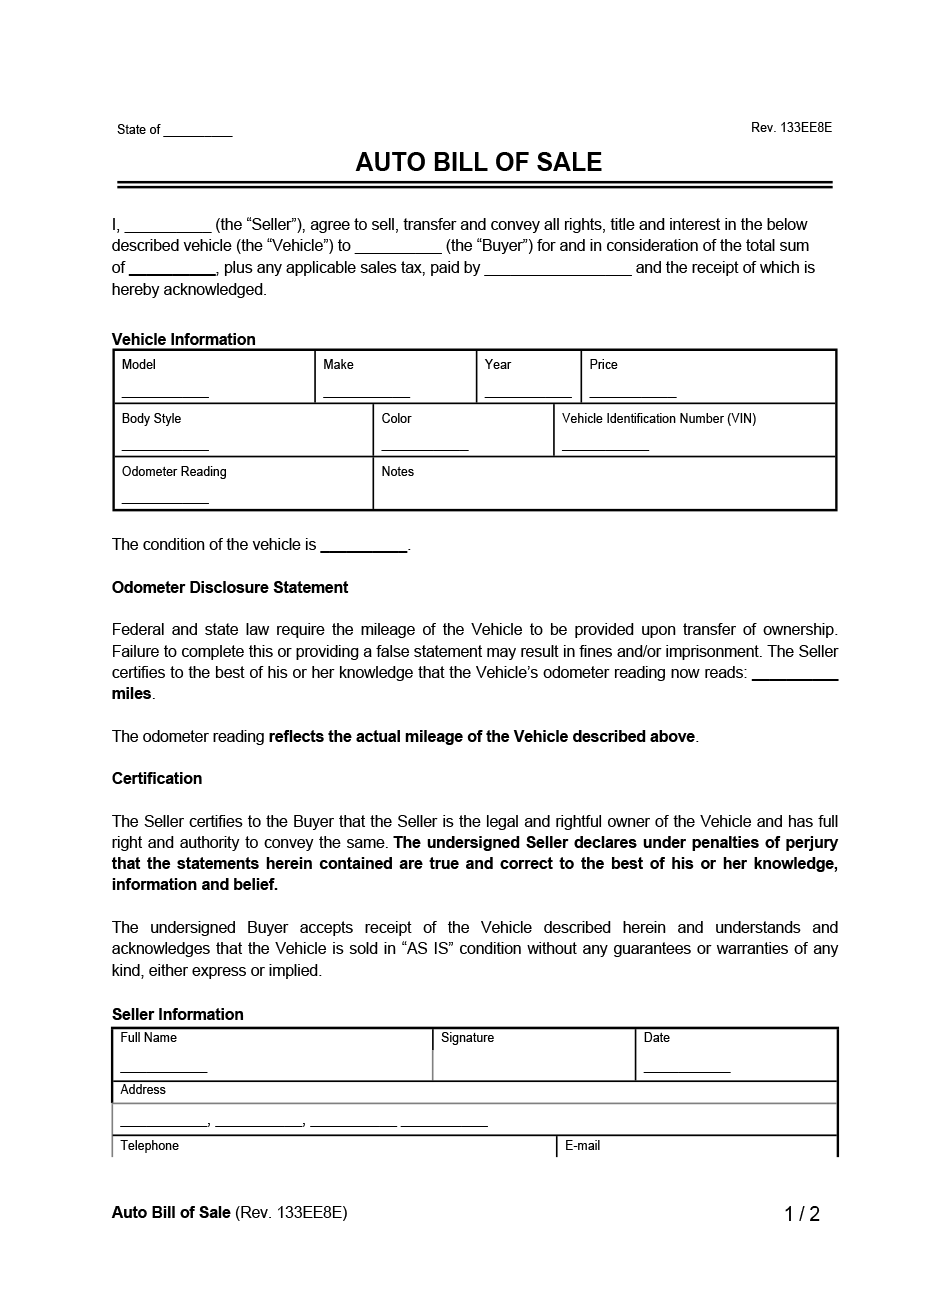 Free Vehicle Bill of Sale Form [For a Car] - PDF & Word Within Vehicle Bill Of Sale Template Word